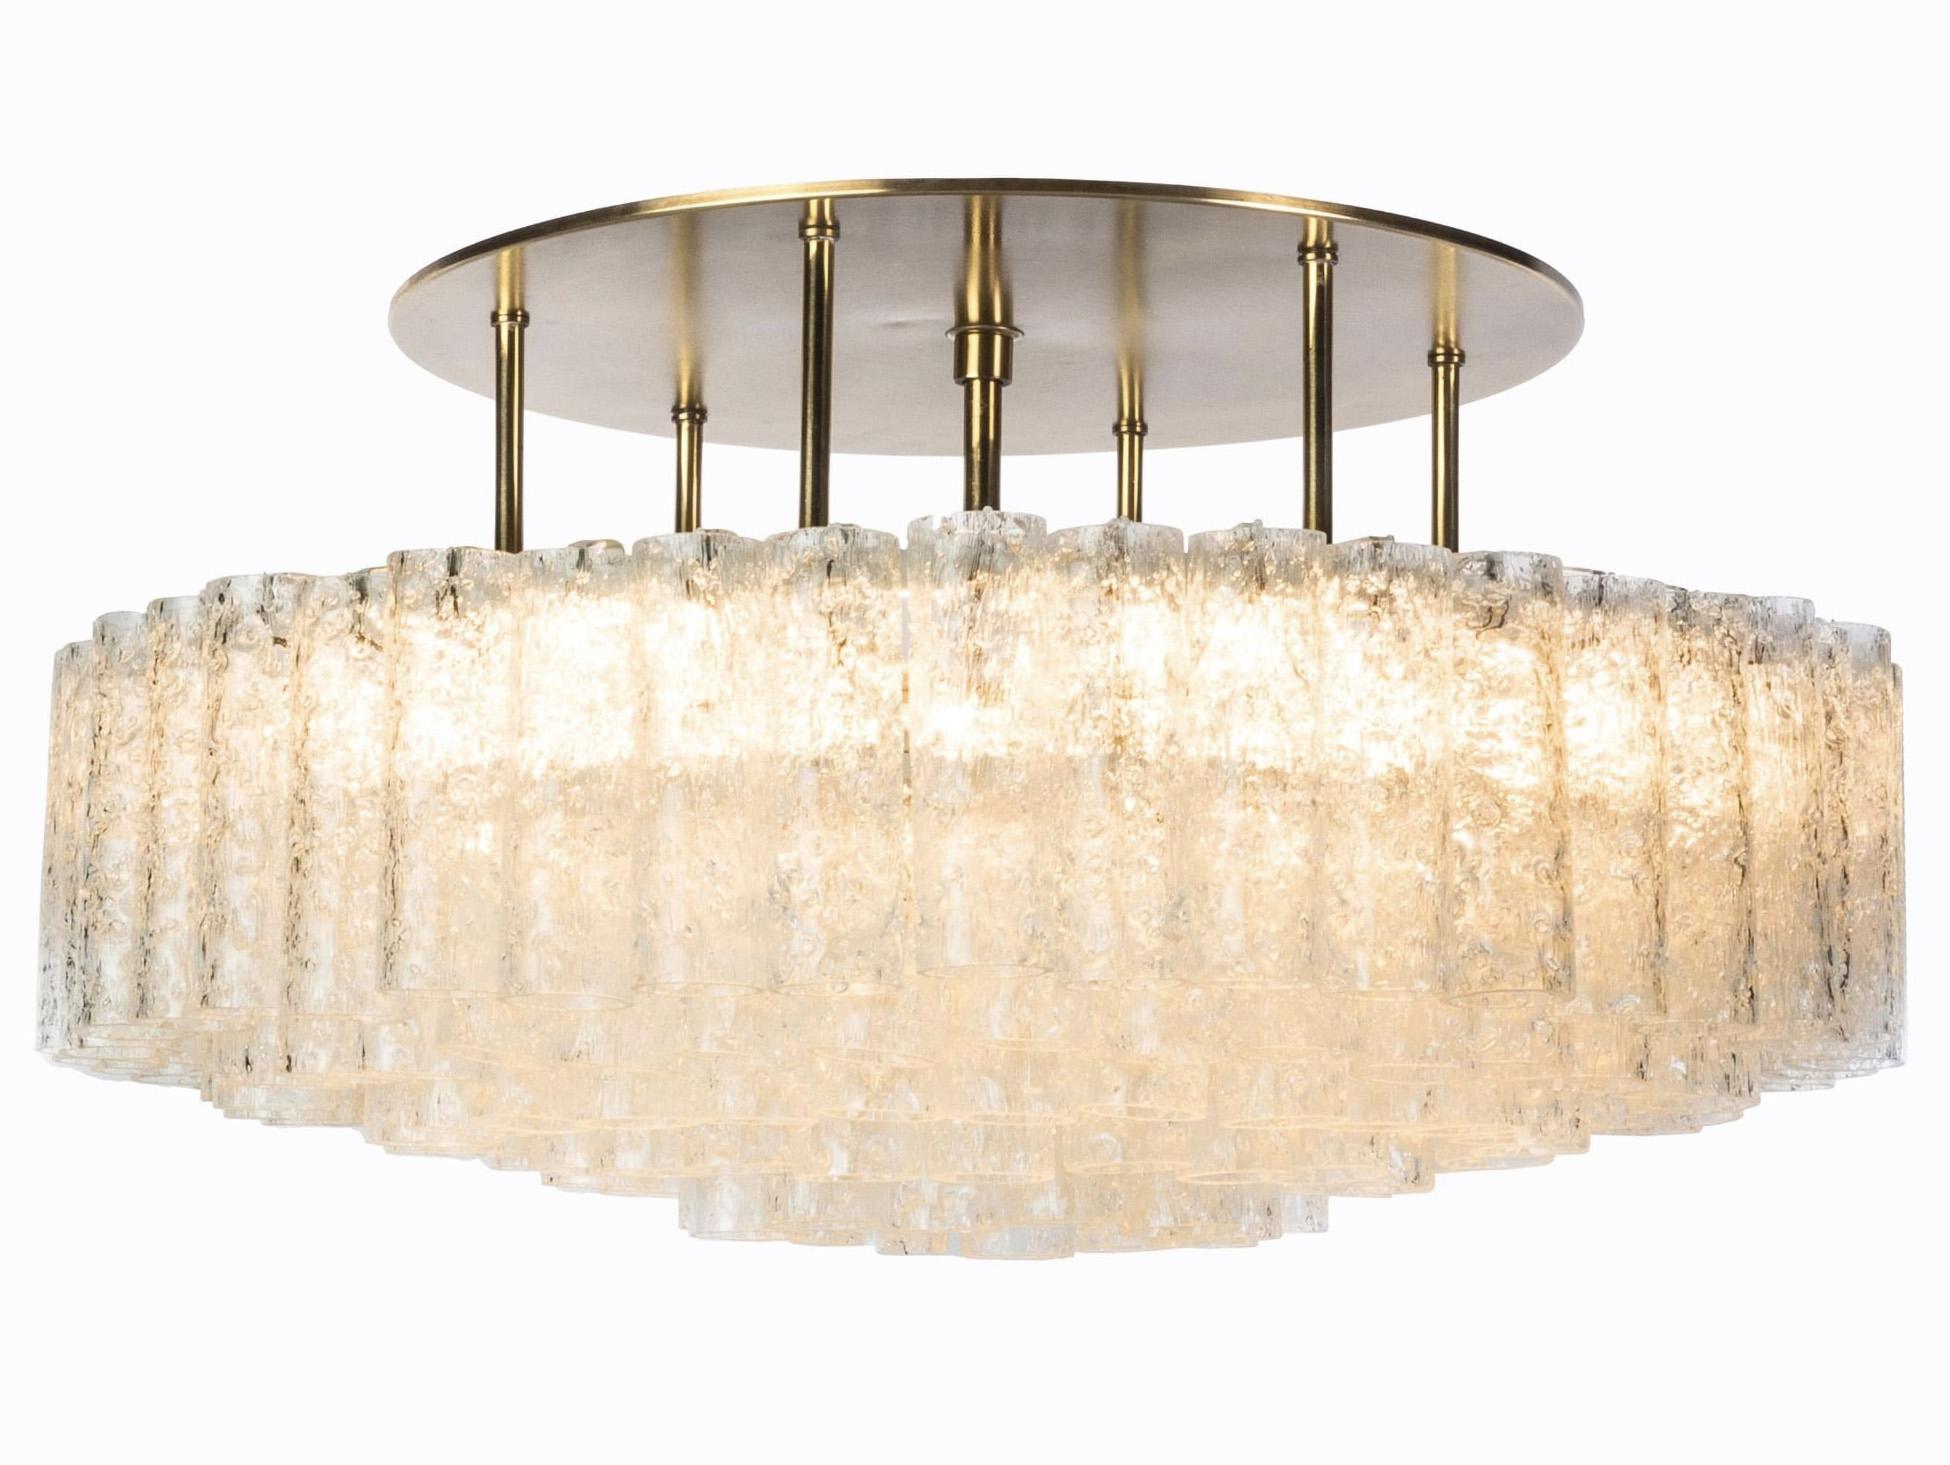 (XL-size) Gorgeous, 1950s Mid-Century Modernist flush mount chandeliers was designed by Doria Leuchten, Germany. It features multi-tiered layers of textured ice glass tubes connected to a circular brushed brass frame. The flush mount with almost 200